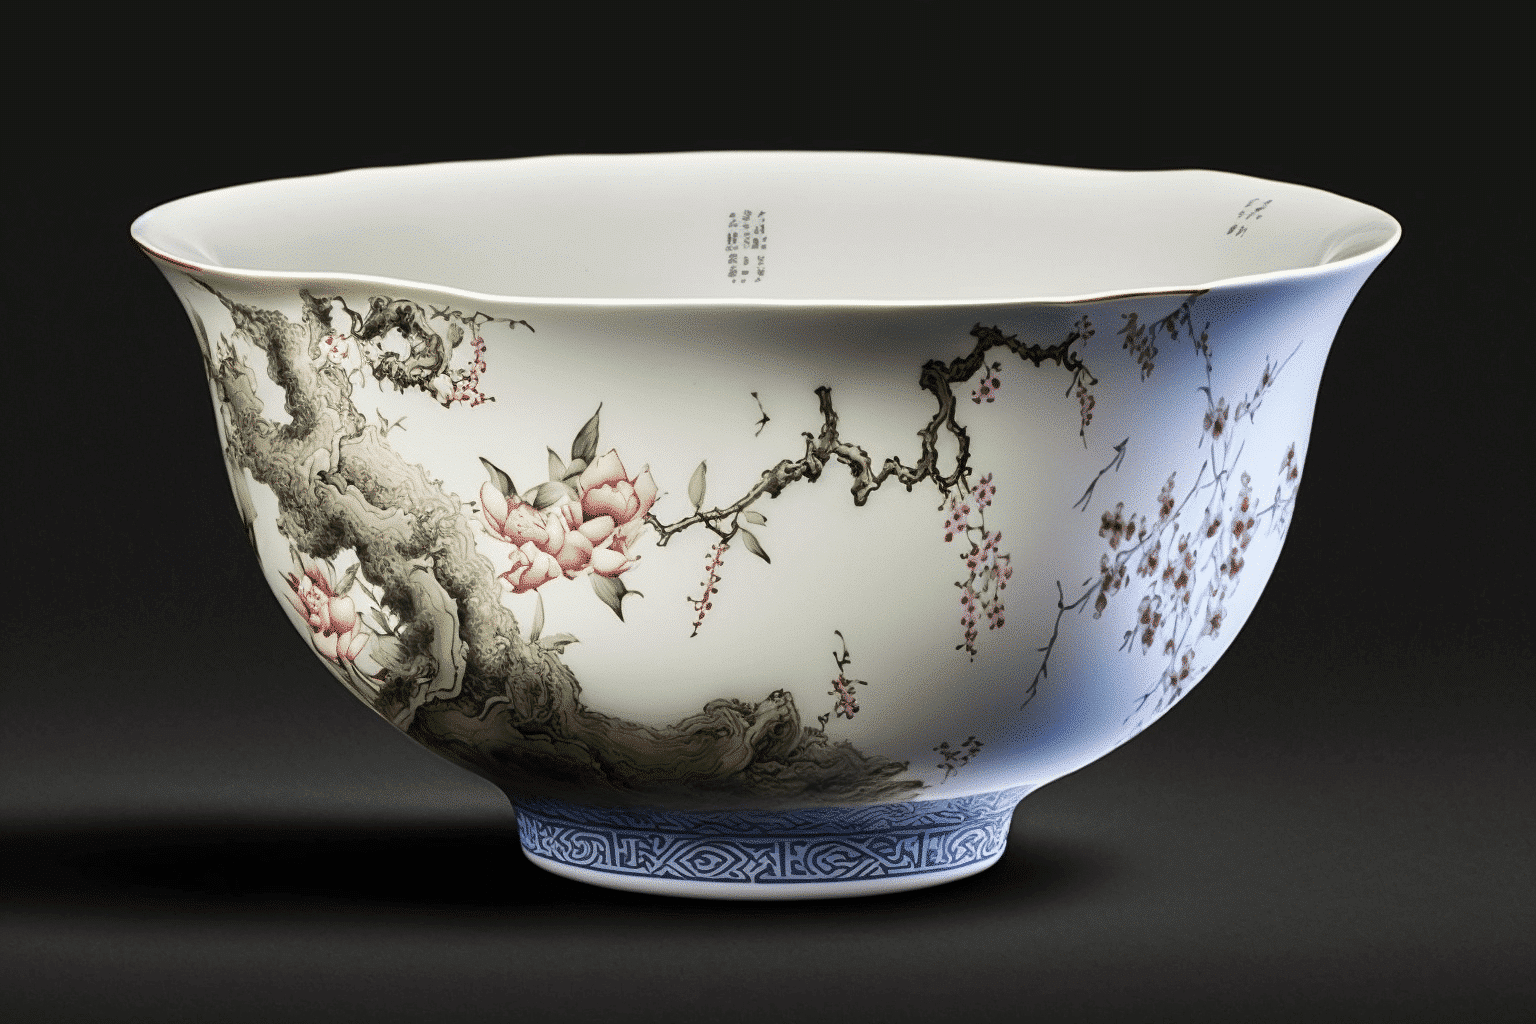 rare-chinese-porcelain-bowl-sells-for-over-$25-million-at-auction